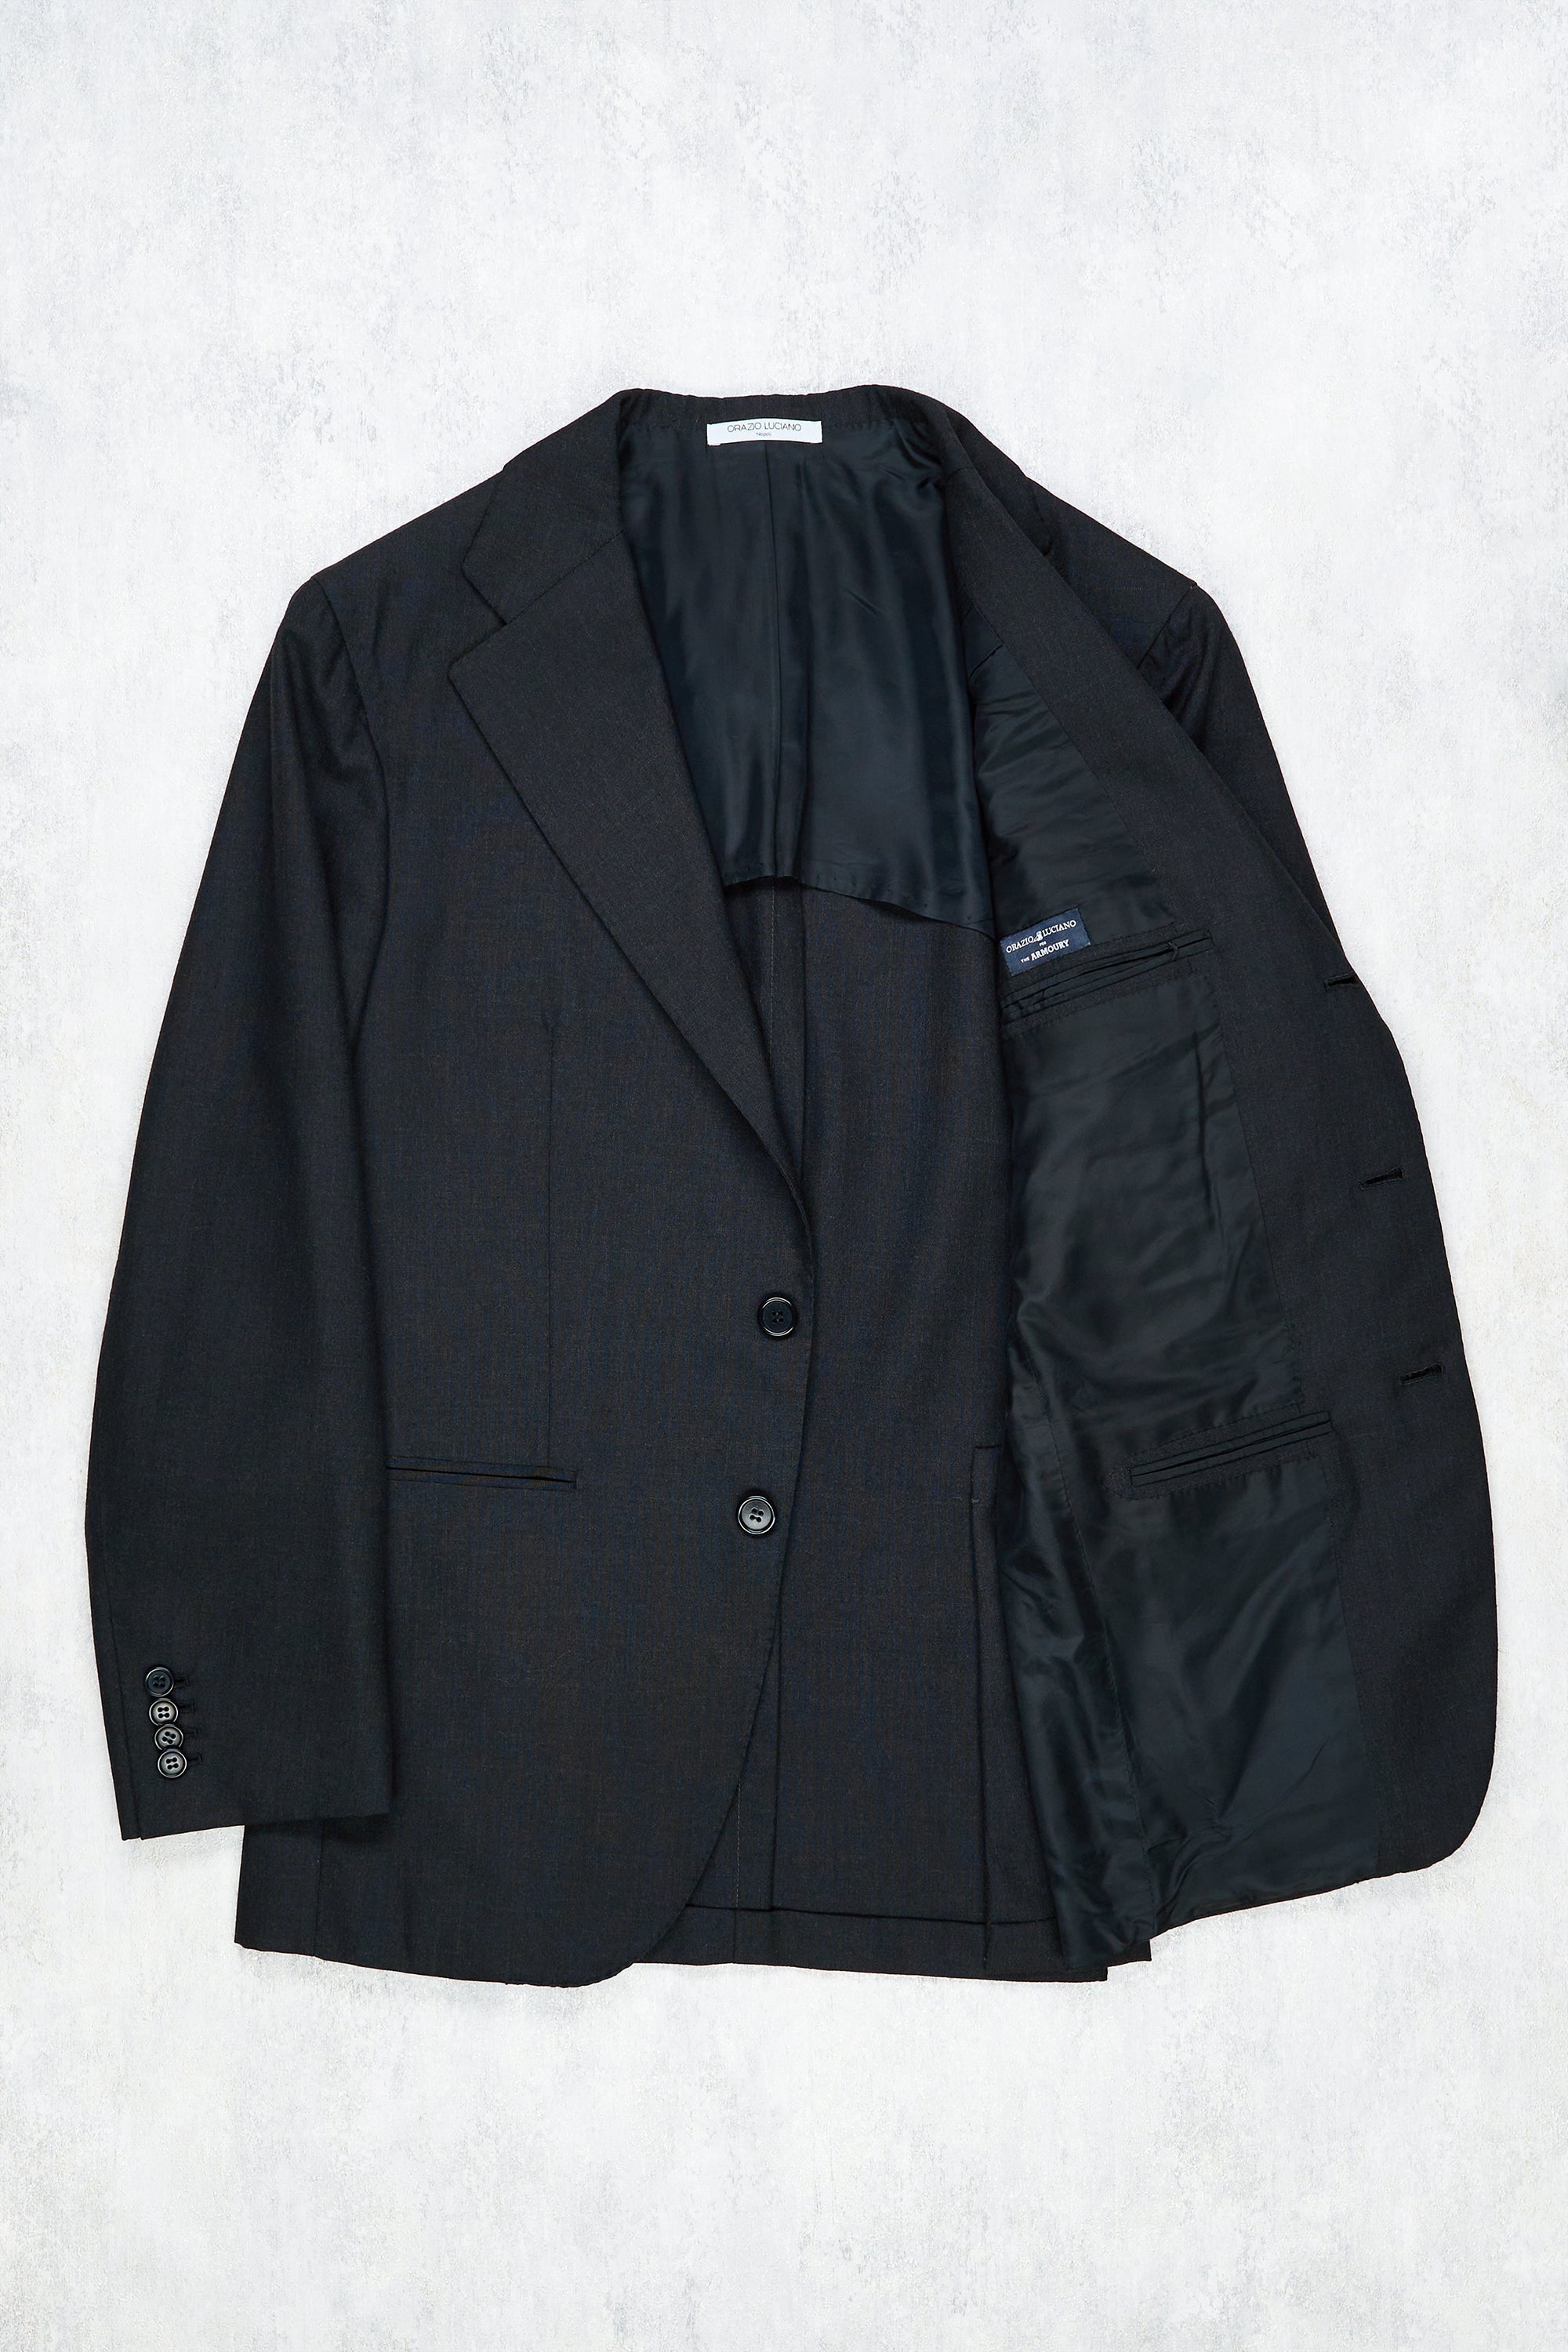 Orazio Luciano Charcoal Wool 3 Piece Suit